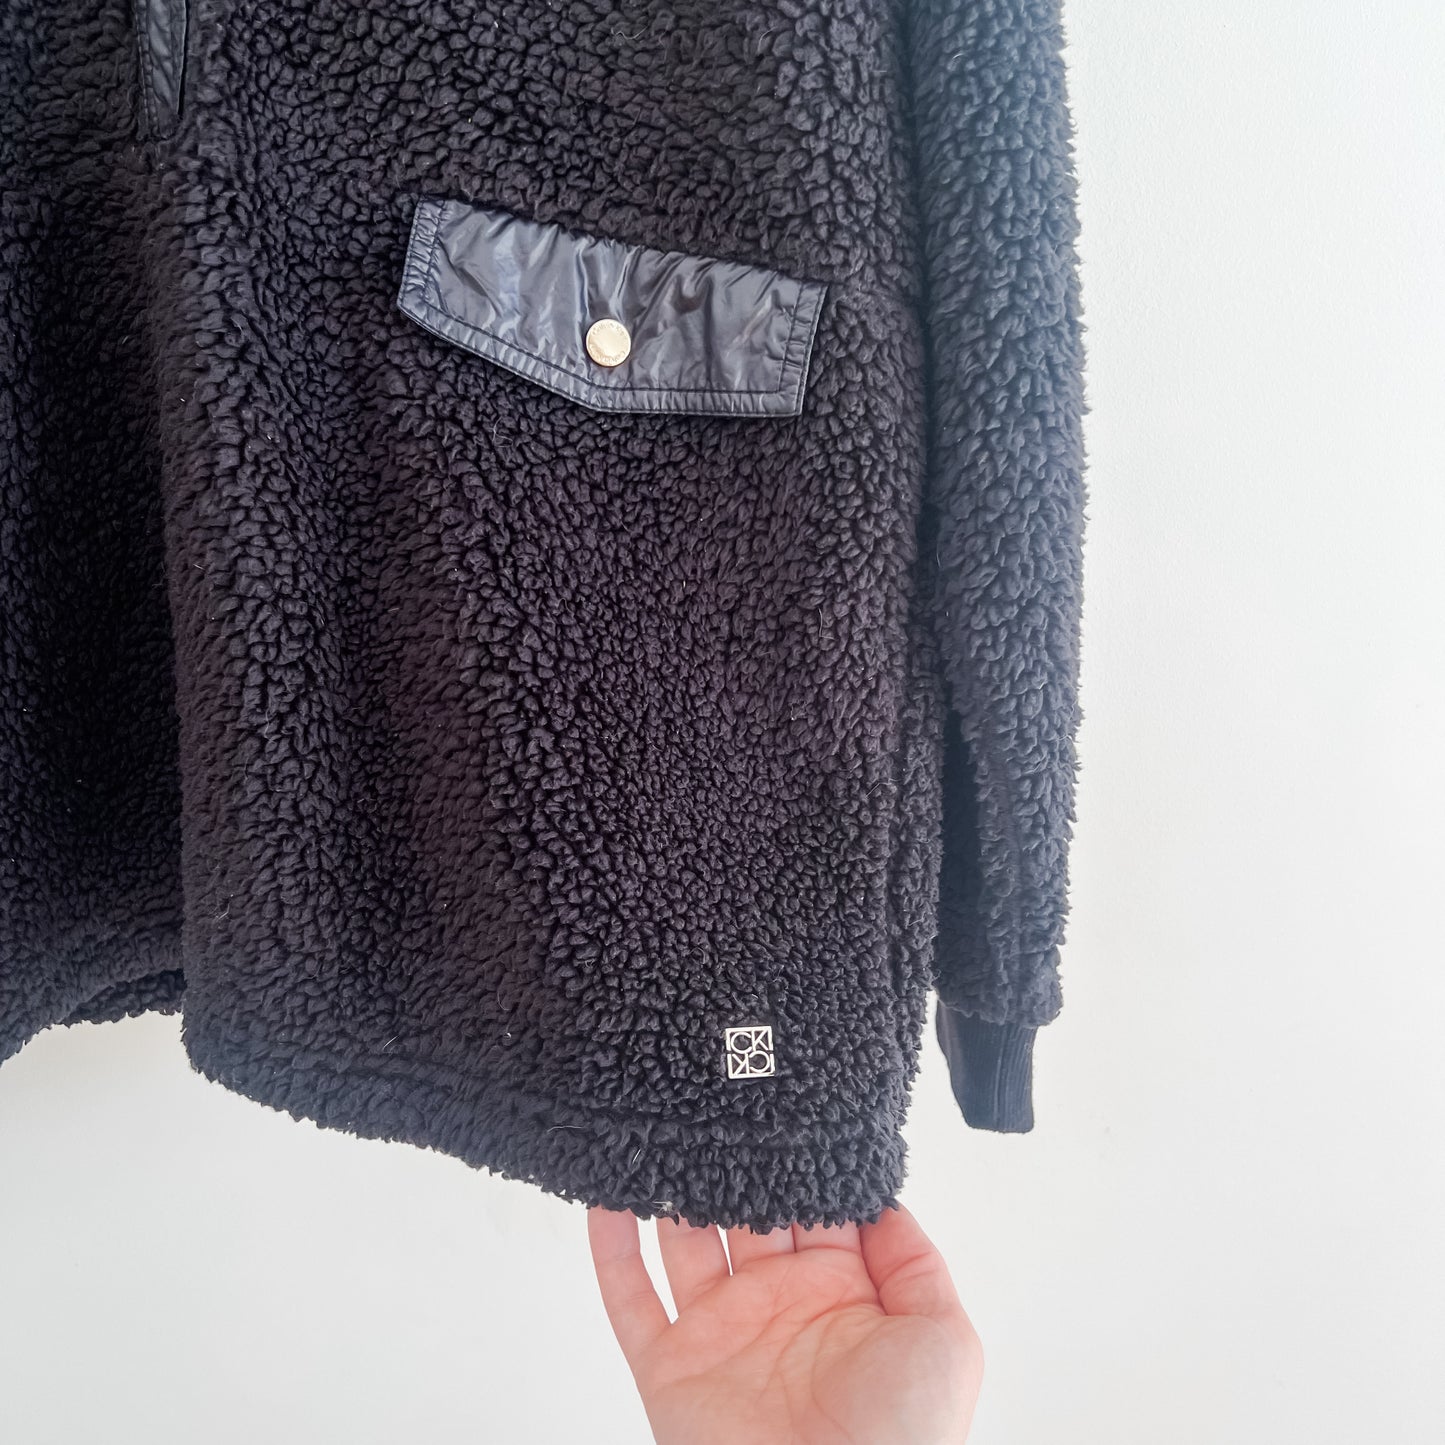 Calvin Klein Sherpa Pull Over Sweater (M)